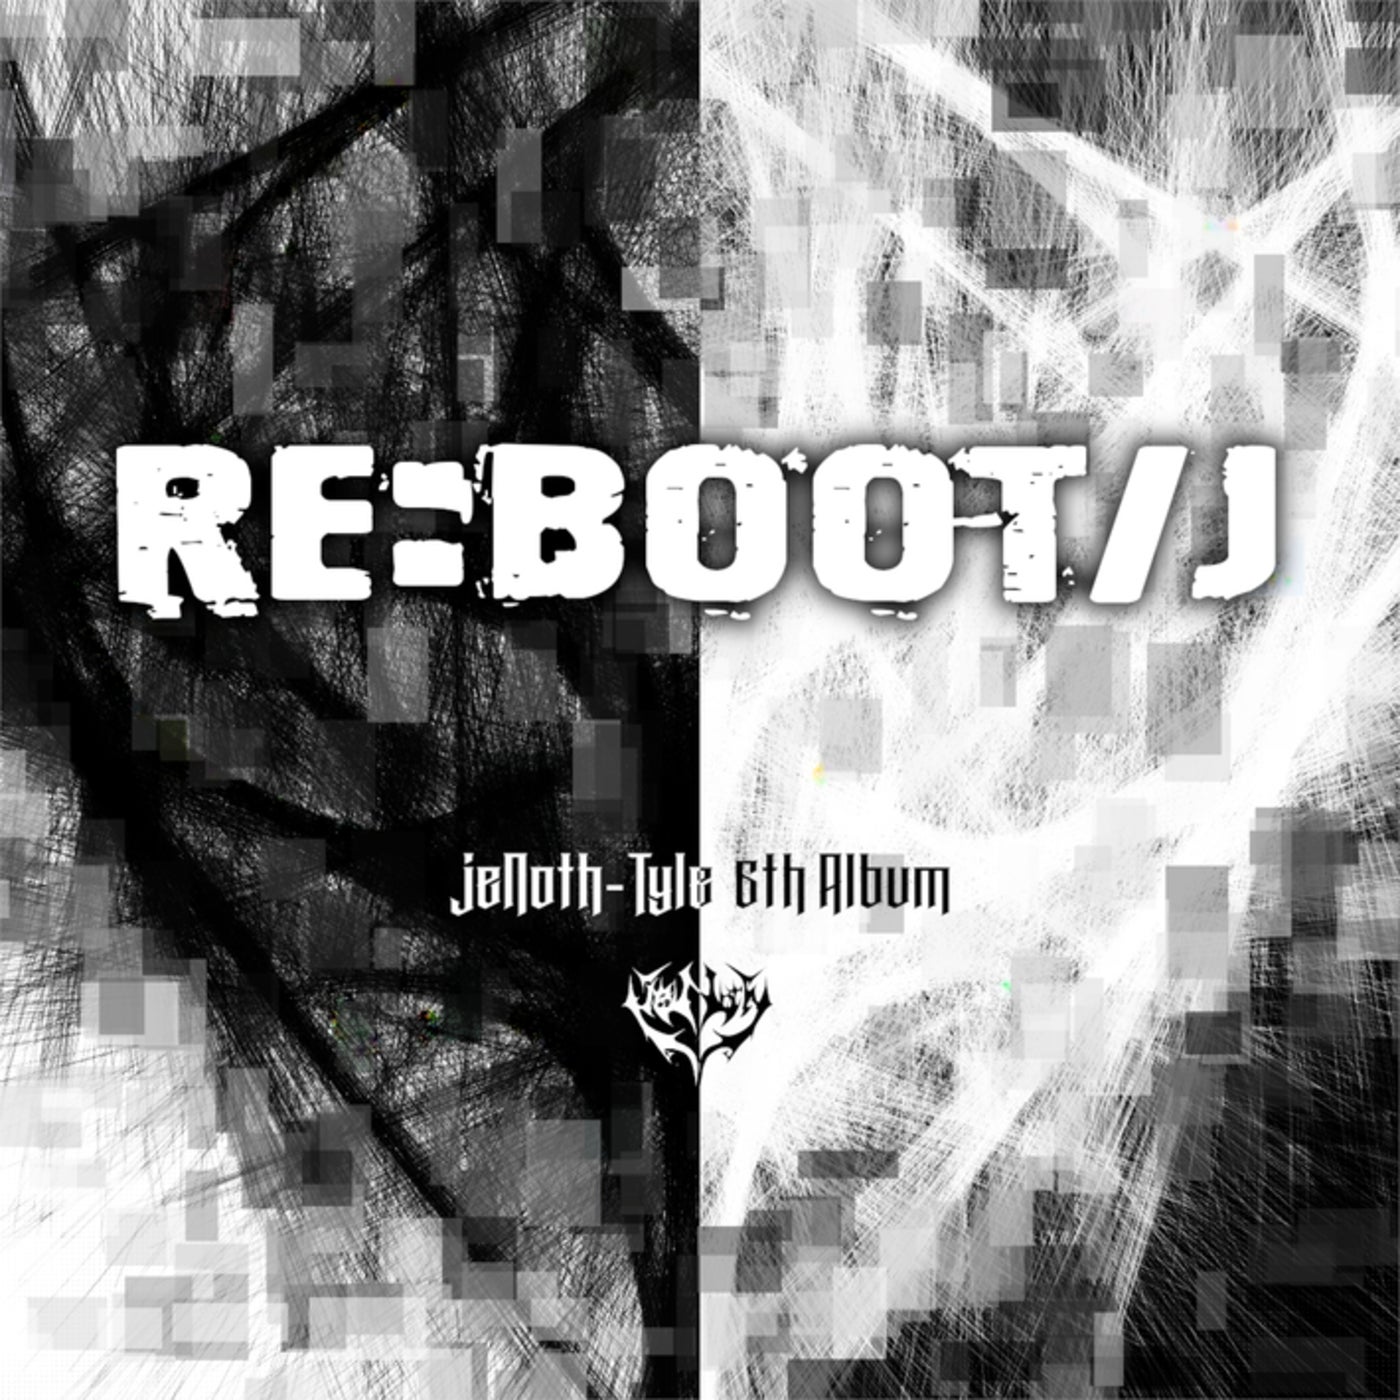 RE:BOOT/J